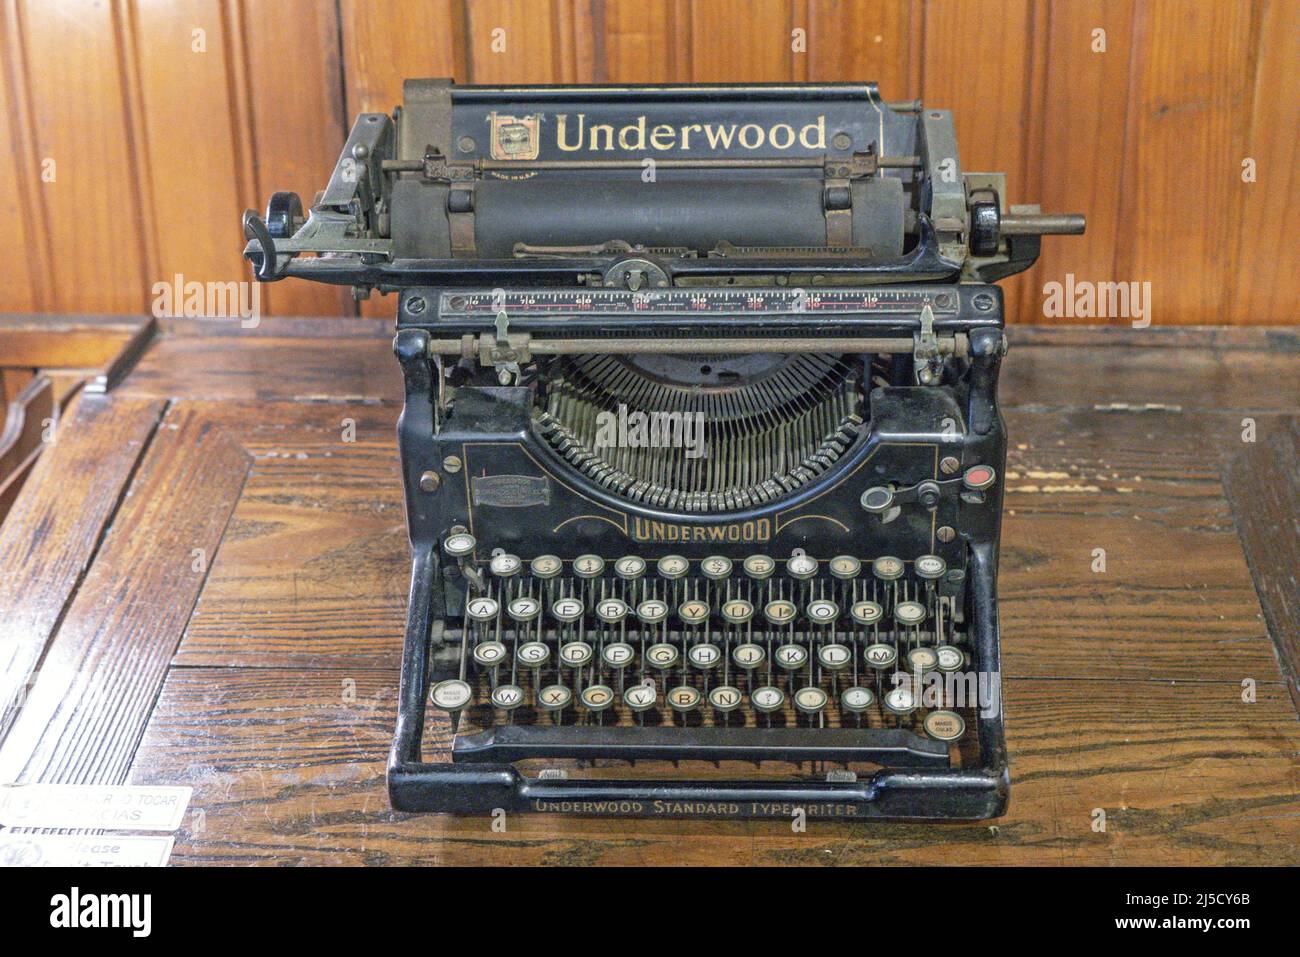 Portugal, Porto, 21.07.2020. Fernandez, Matos and Ca., Ltda. in Porto on 21.07.2020. Old typewriter. In the heart of the city center of Porto, Fernandes, Mattos and Ca., Lda. was founded back in 1886 as a renowned fabric shop. It is in the hands of the heirs of the first owners and still preserves all the atmosphere and architecture of this old building and its unique interior. The shop is now a magical space filled with traditional Portuguese toys, decorative pieces and contemporary vintage design, items. Desk. [automated translation] Stock Photo